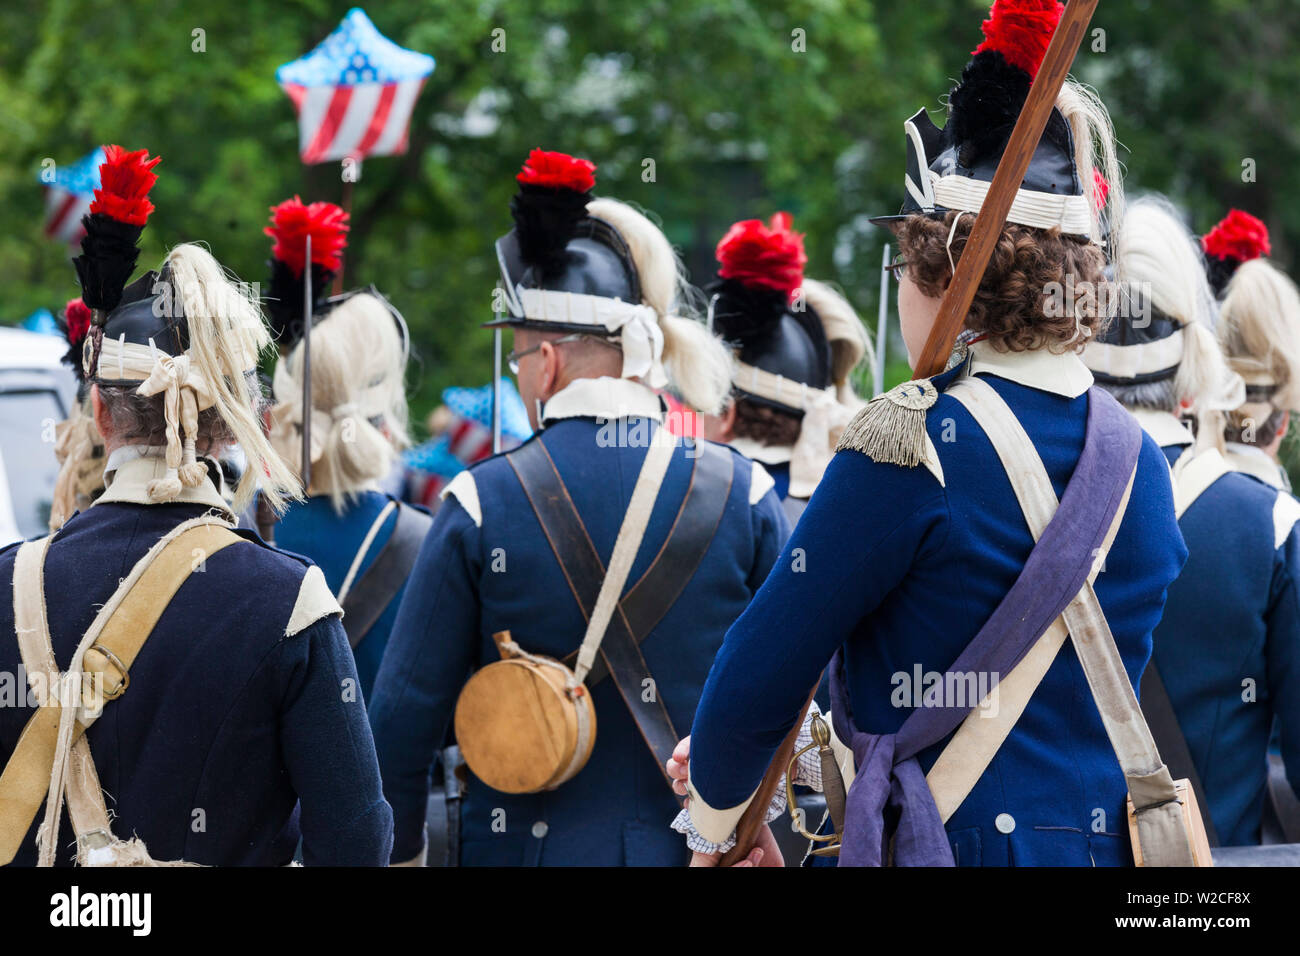 USA, Massachusetts, Cape Ann, Manchester by the Sea, Fourth of July Parade, re-enactors in uniforms of the American Revolution Stock Photo